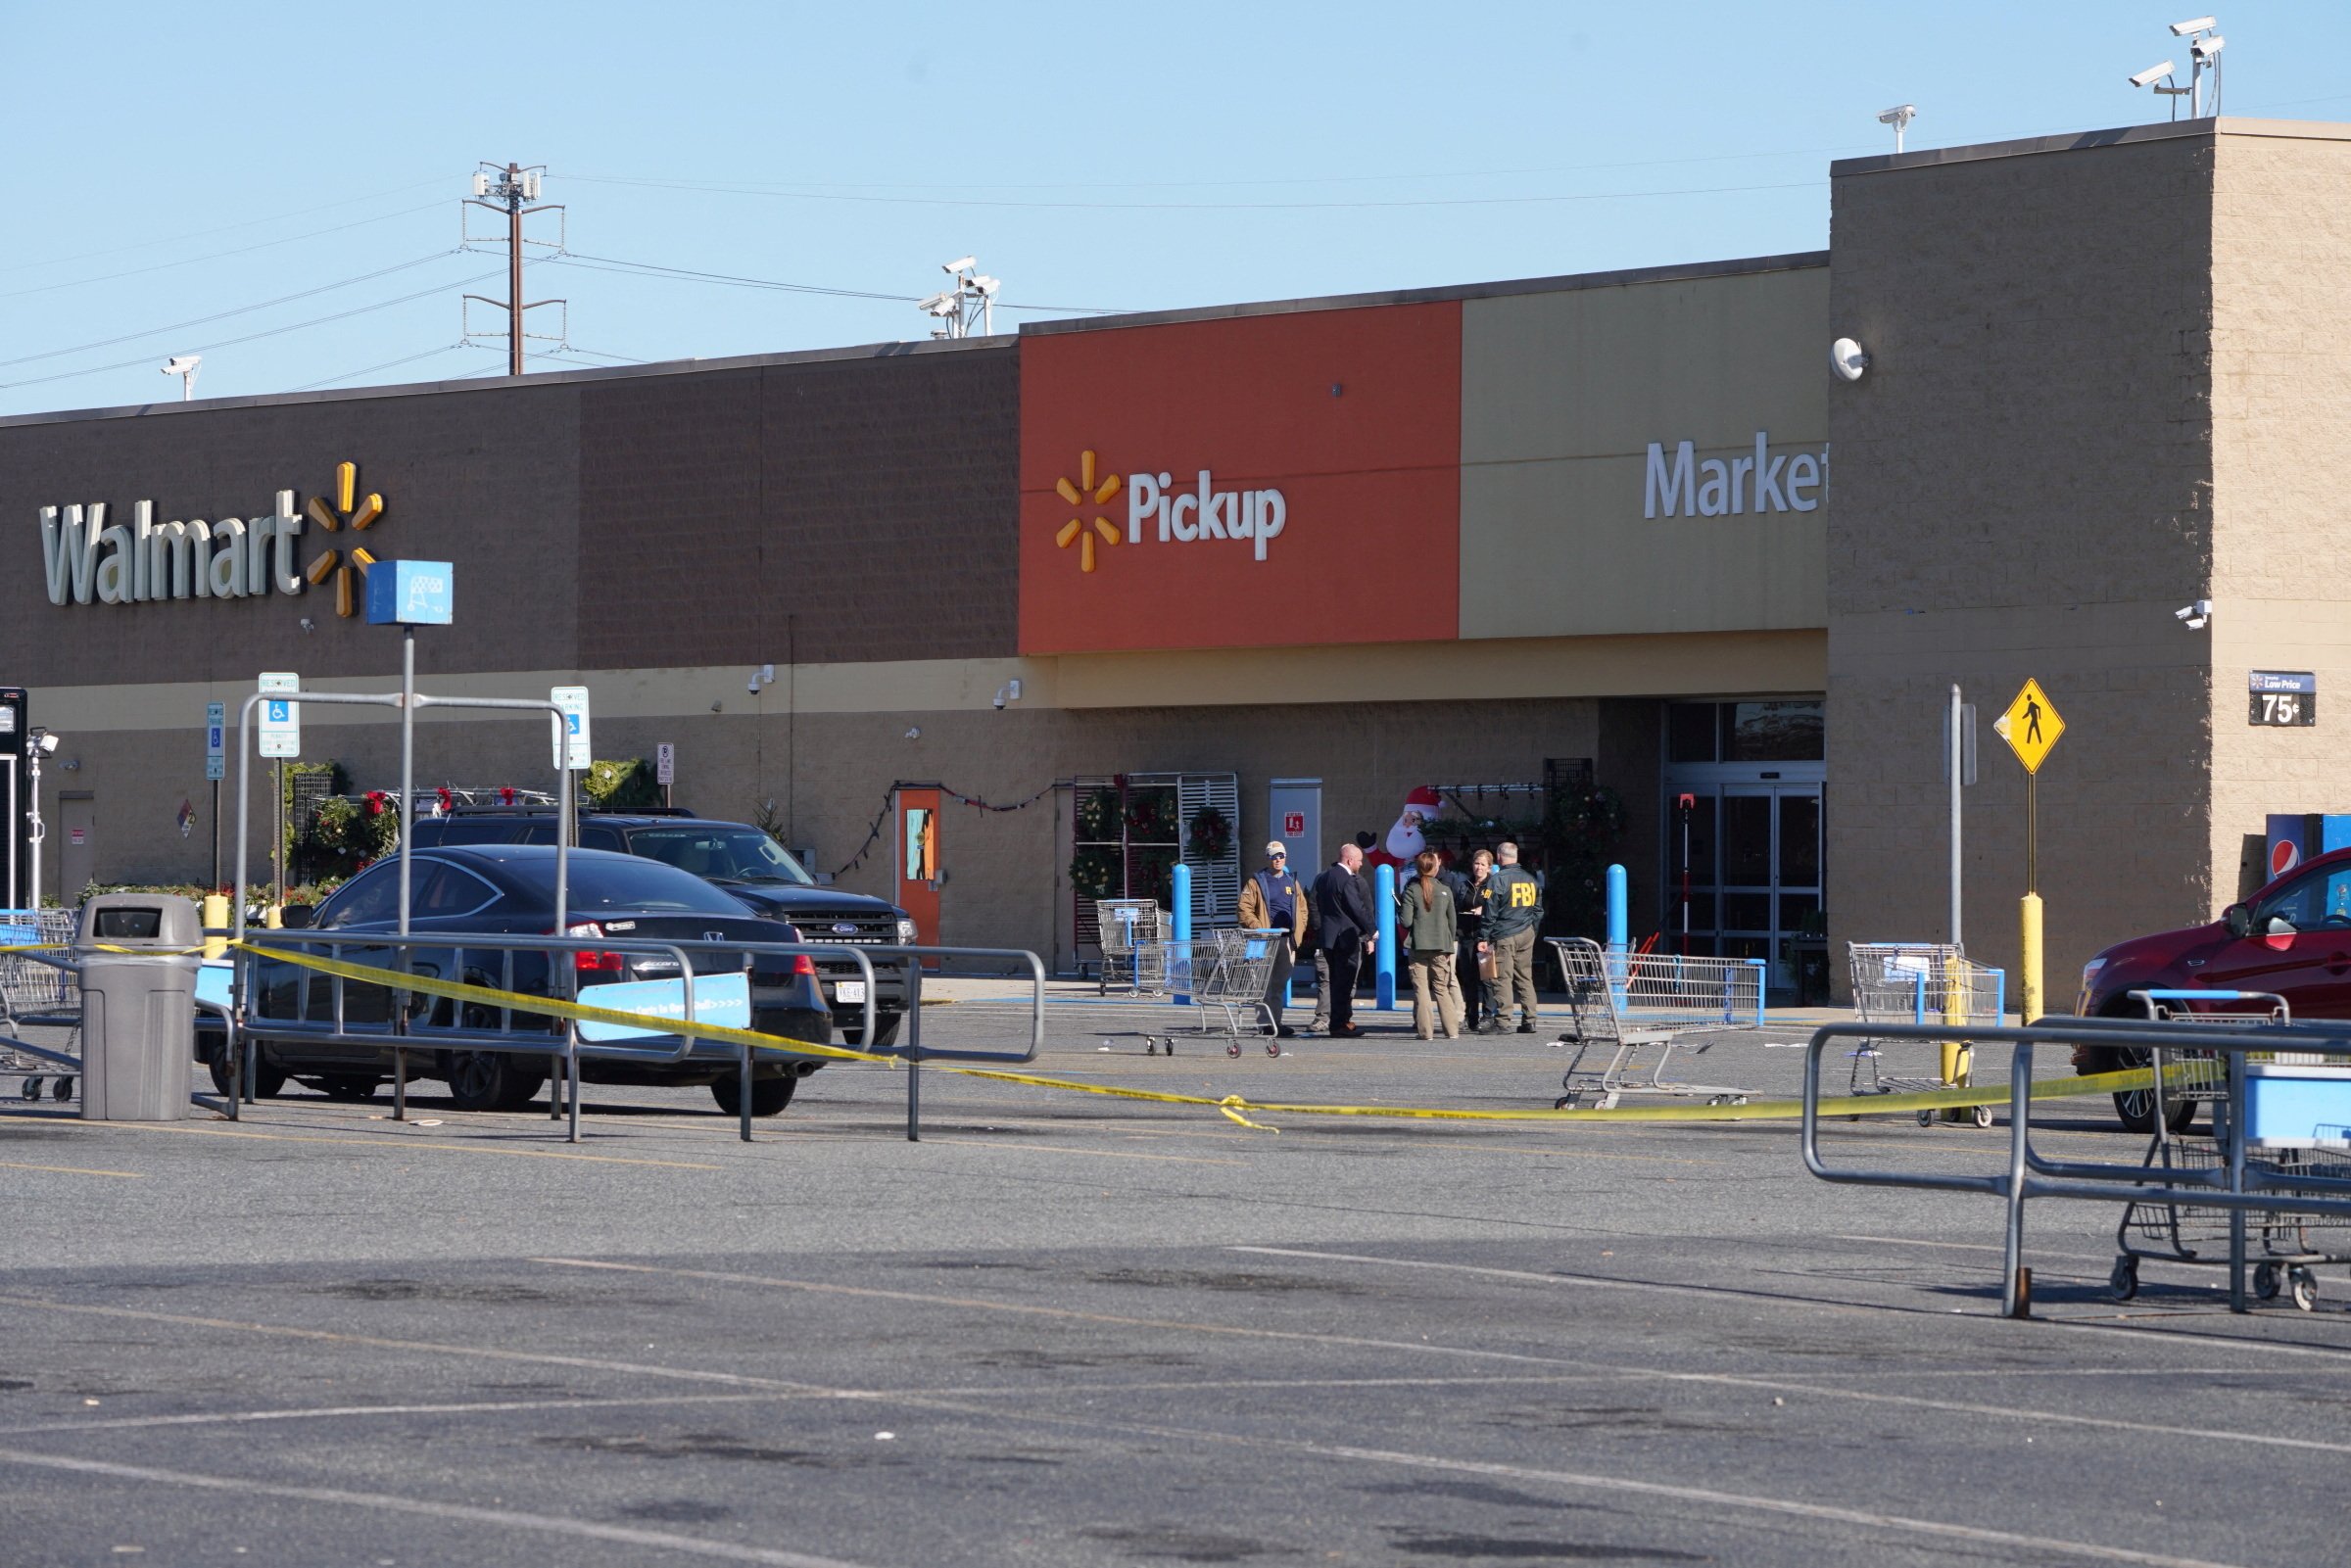 The aftermath of a mass shooting at Walmart in Chesapeake